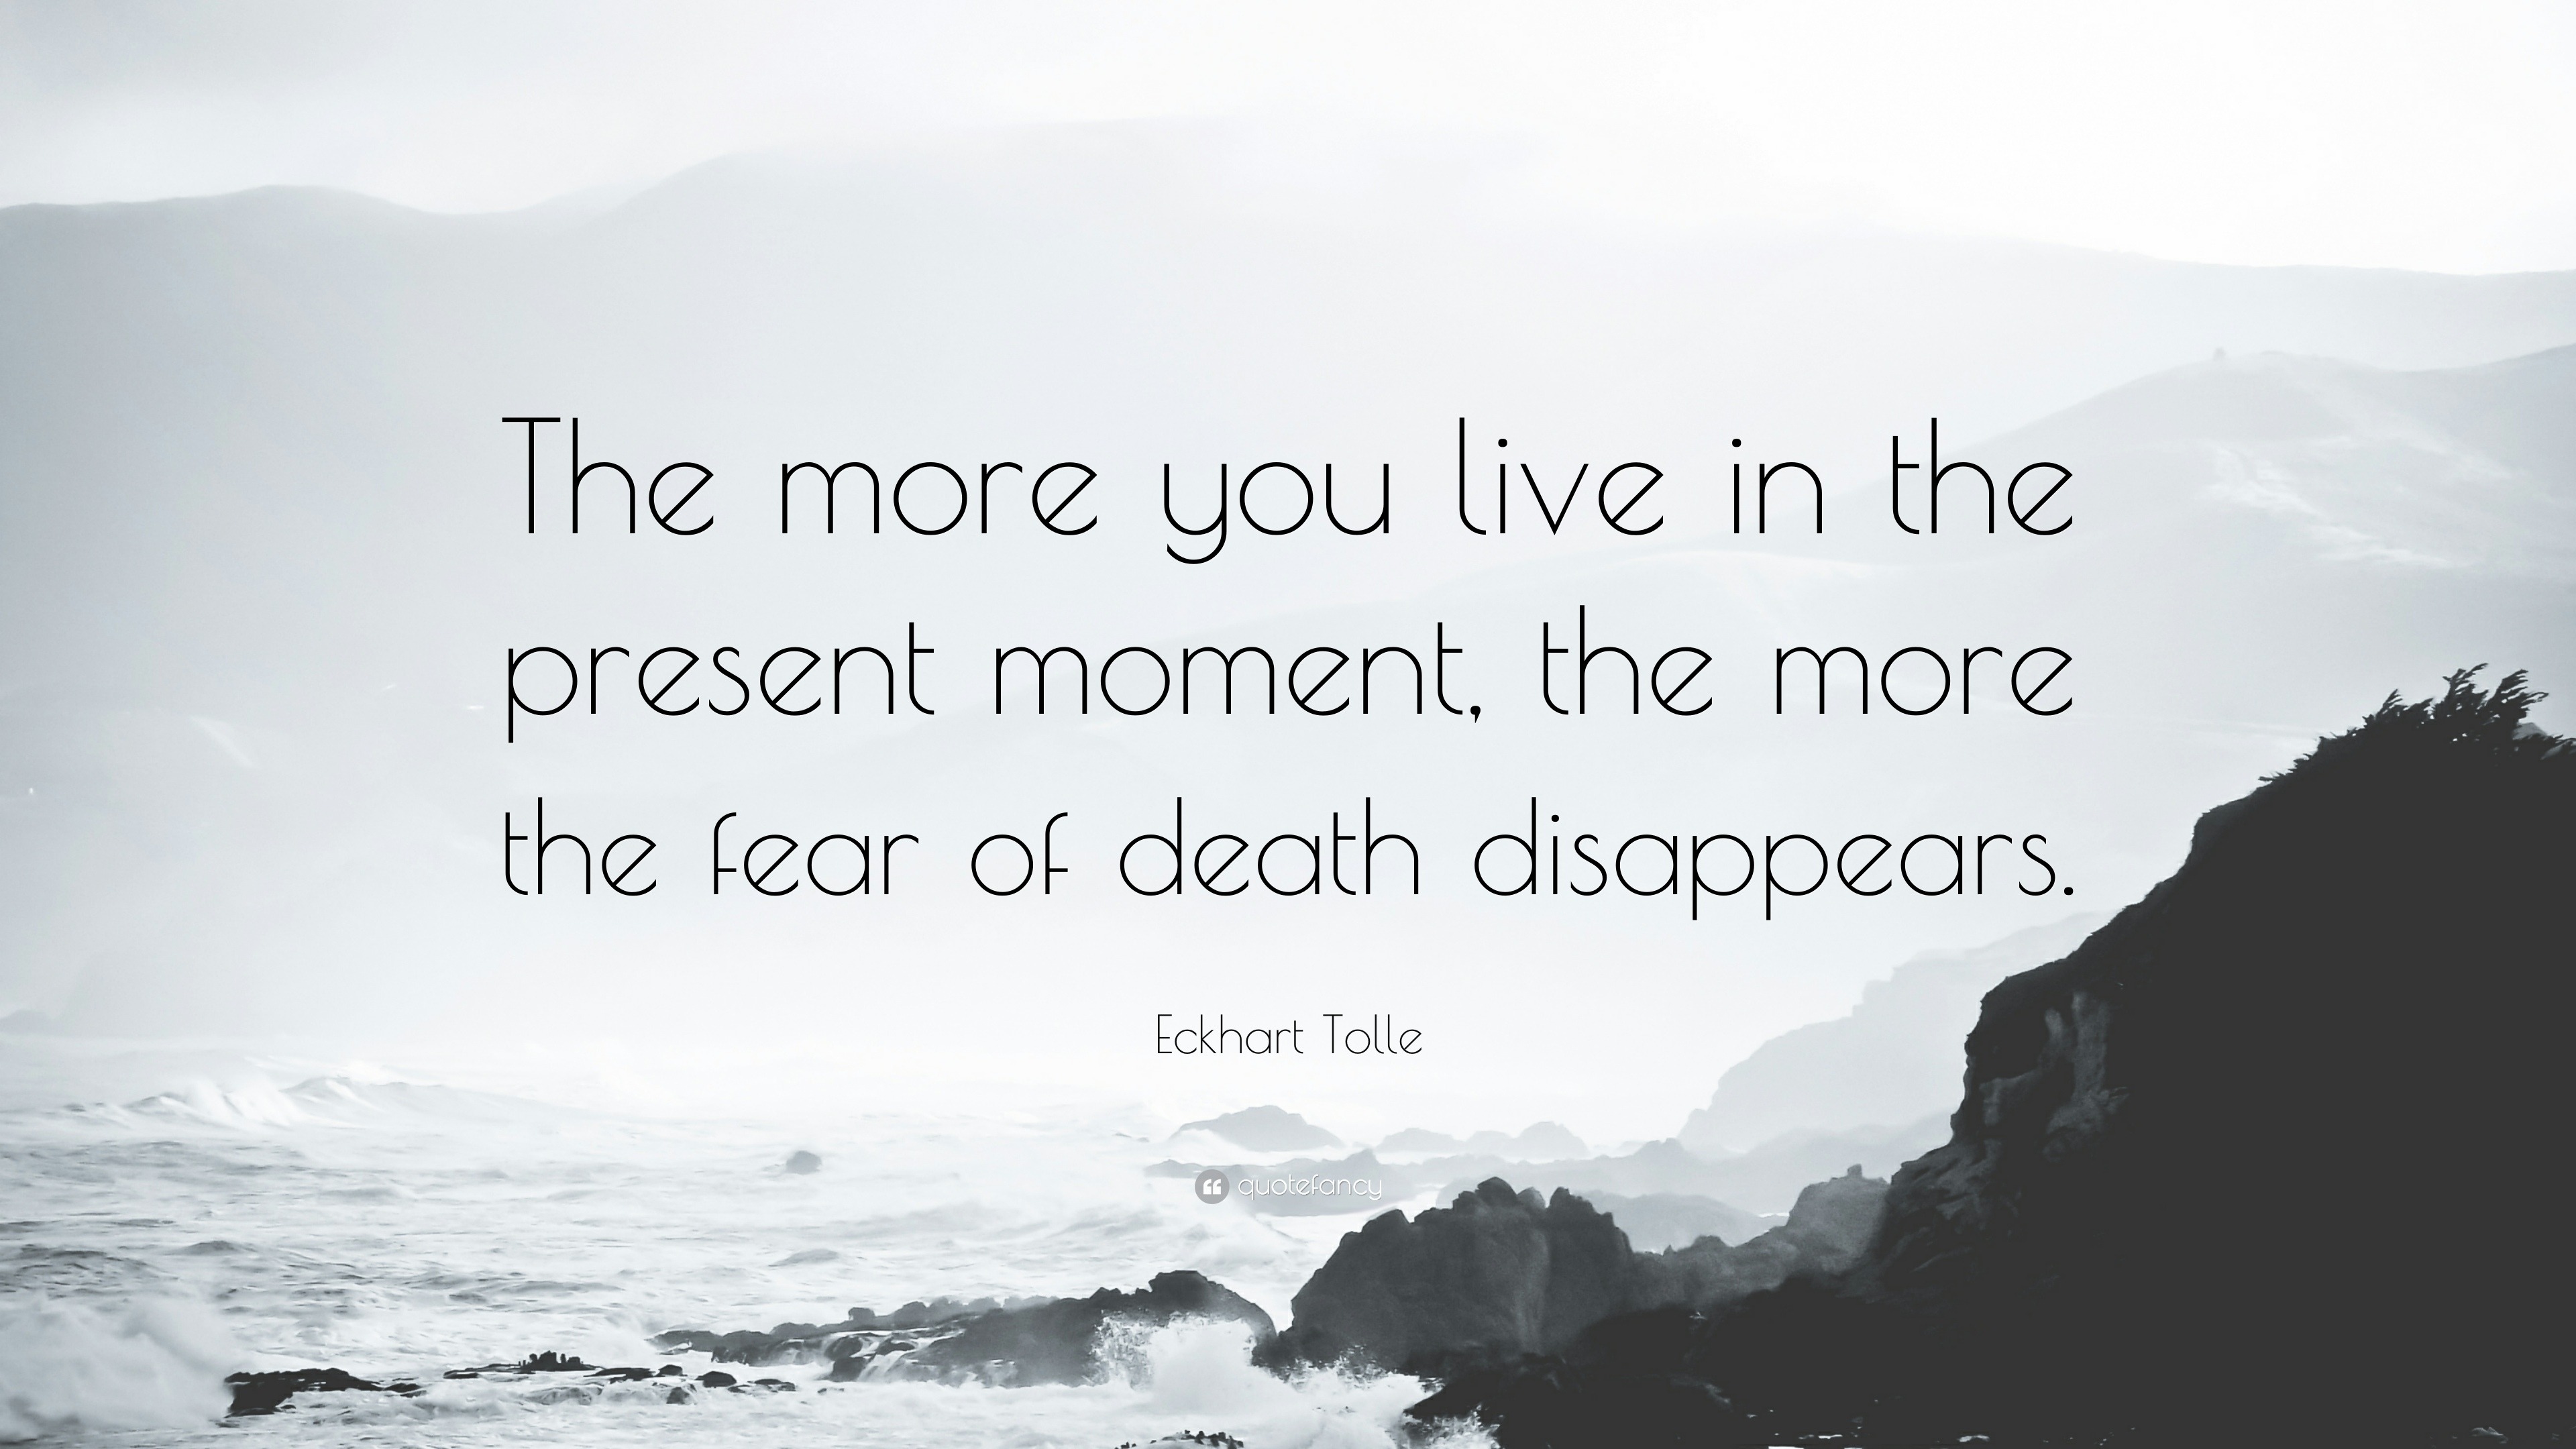 Eckhart Tolle Quote The More You Live In The Present Moment The More The Fear Of Death Disappears 12 Wallpapers Quotefancy